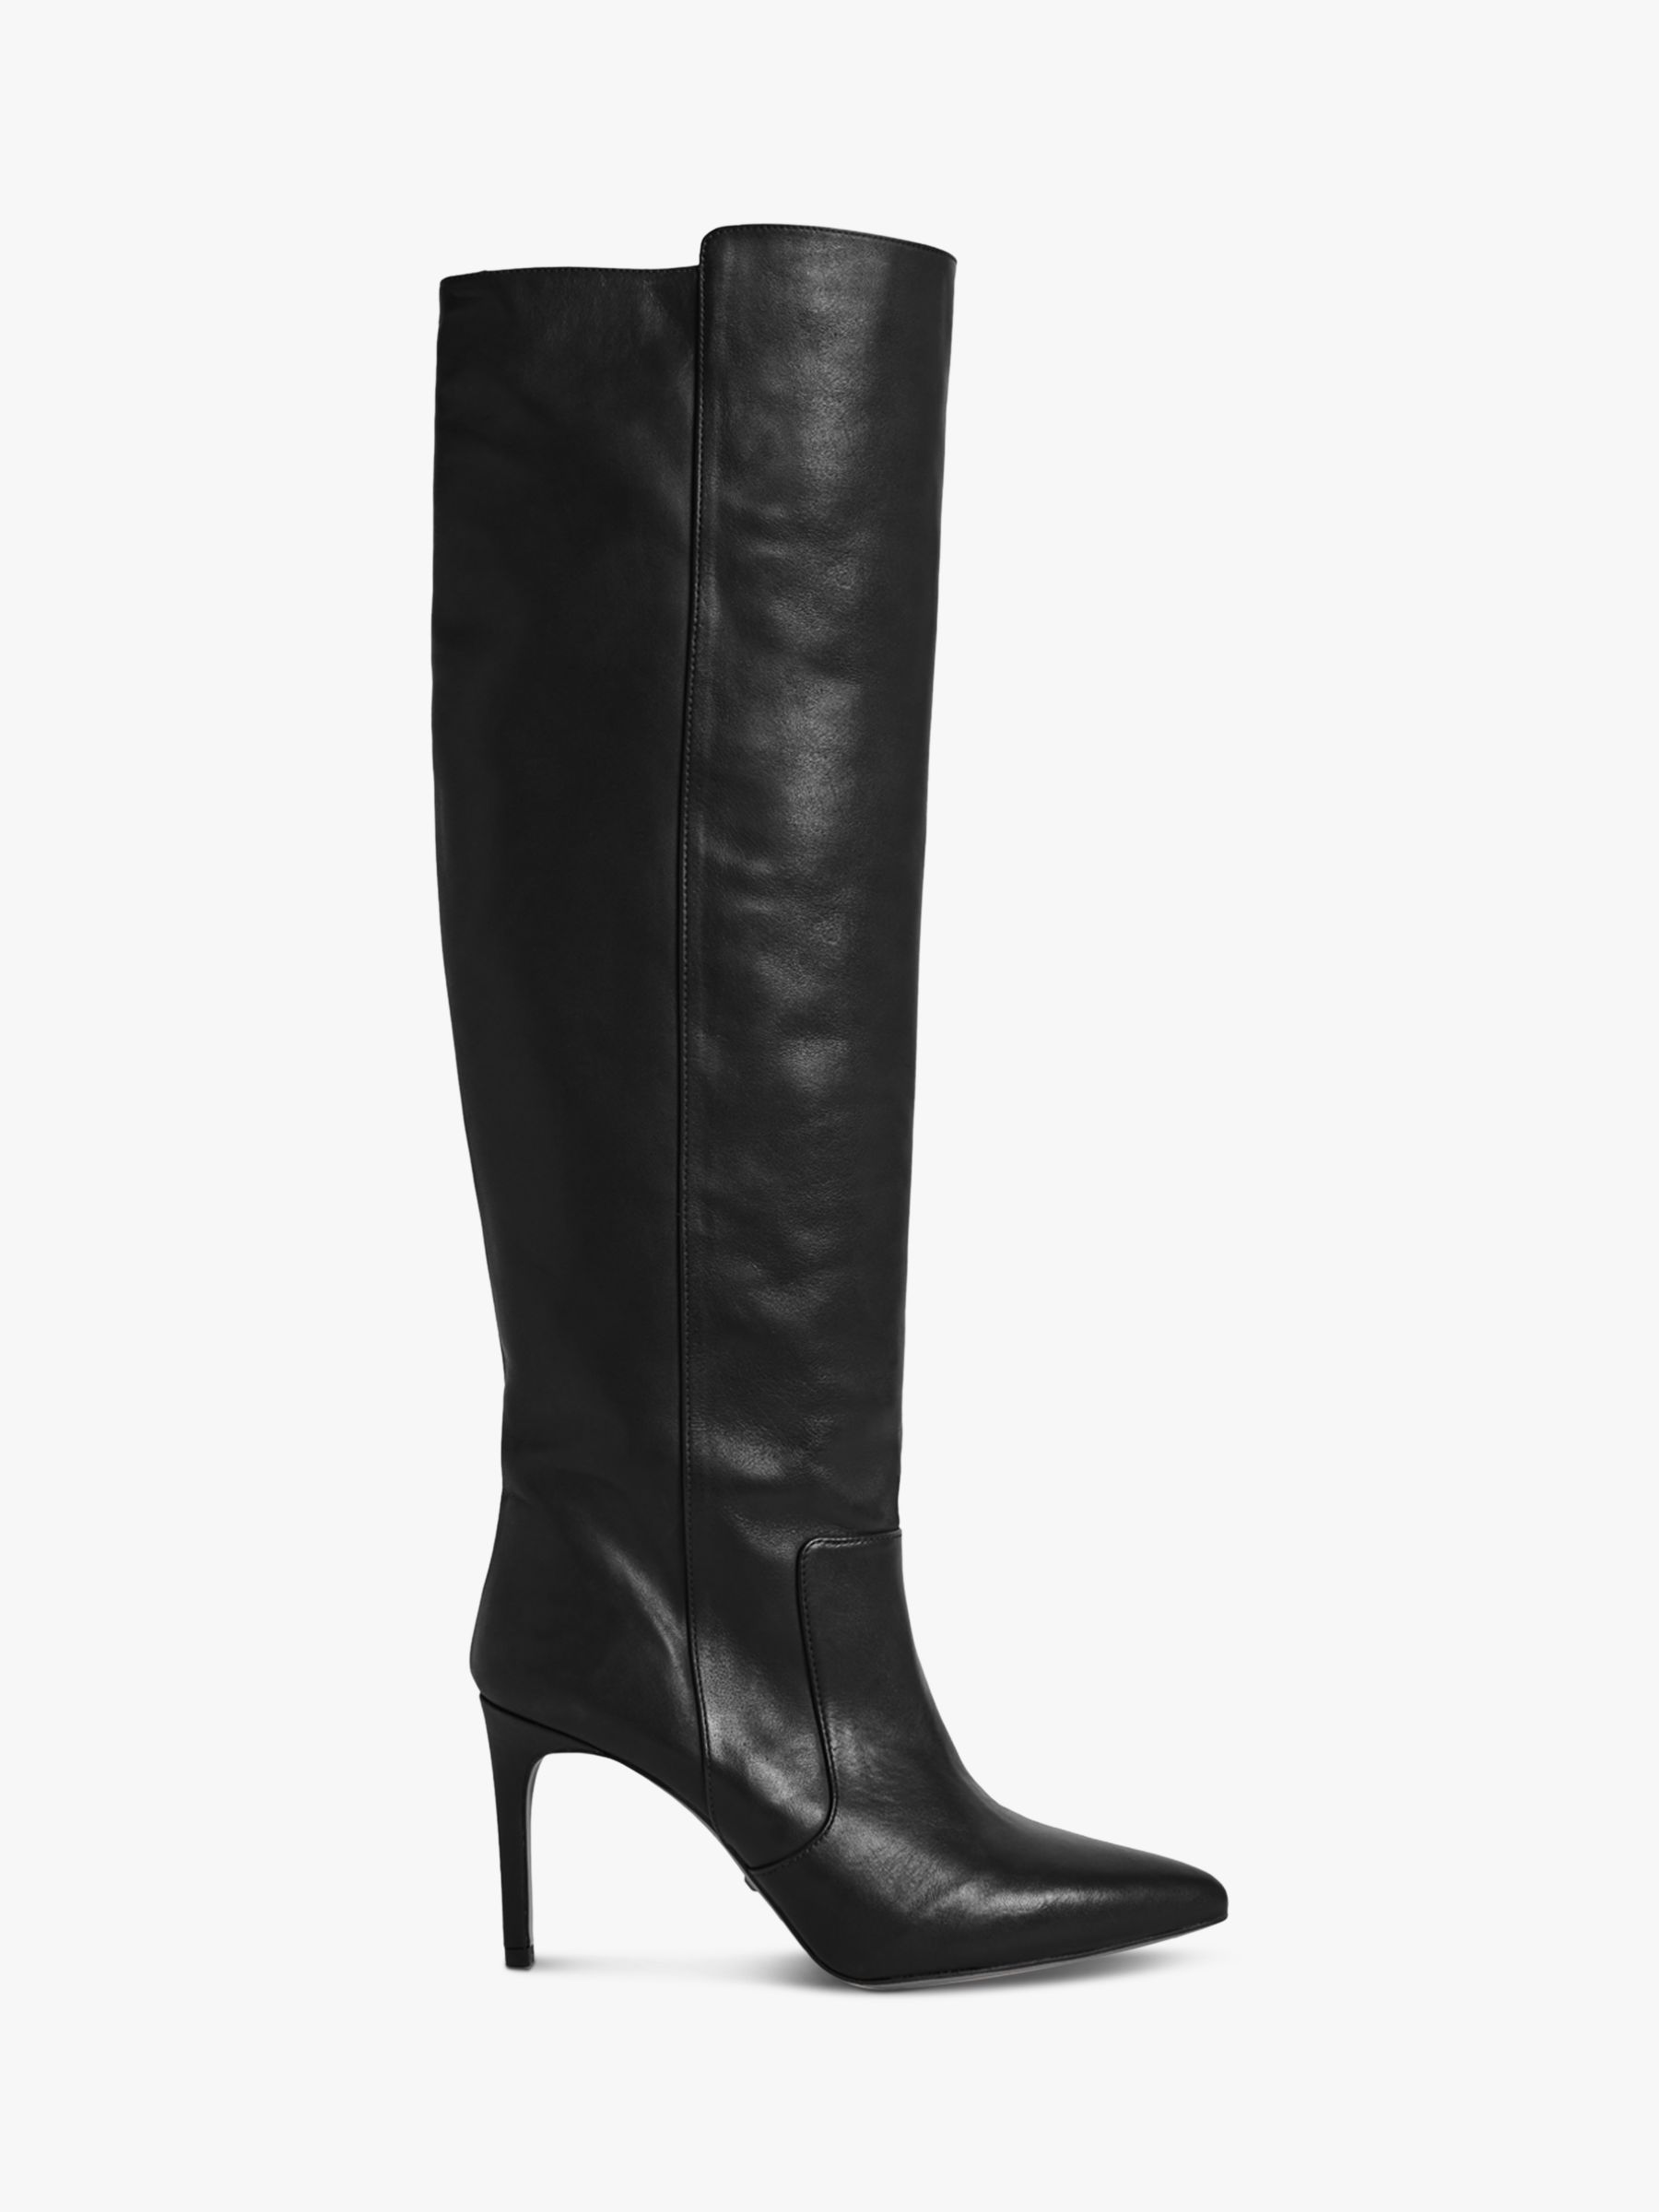 Reiss Zinnia Leather Pointed Toe Knee High Boots, Black